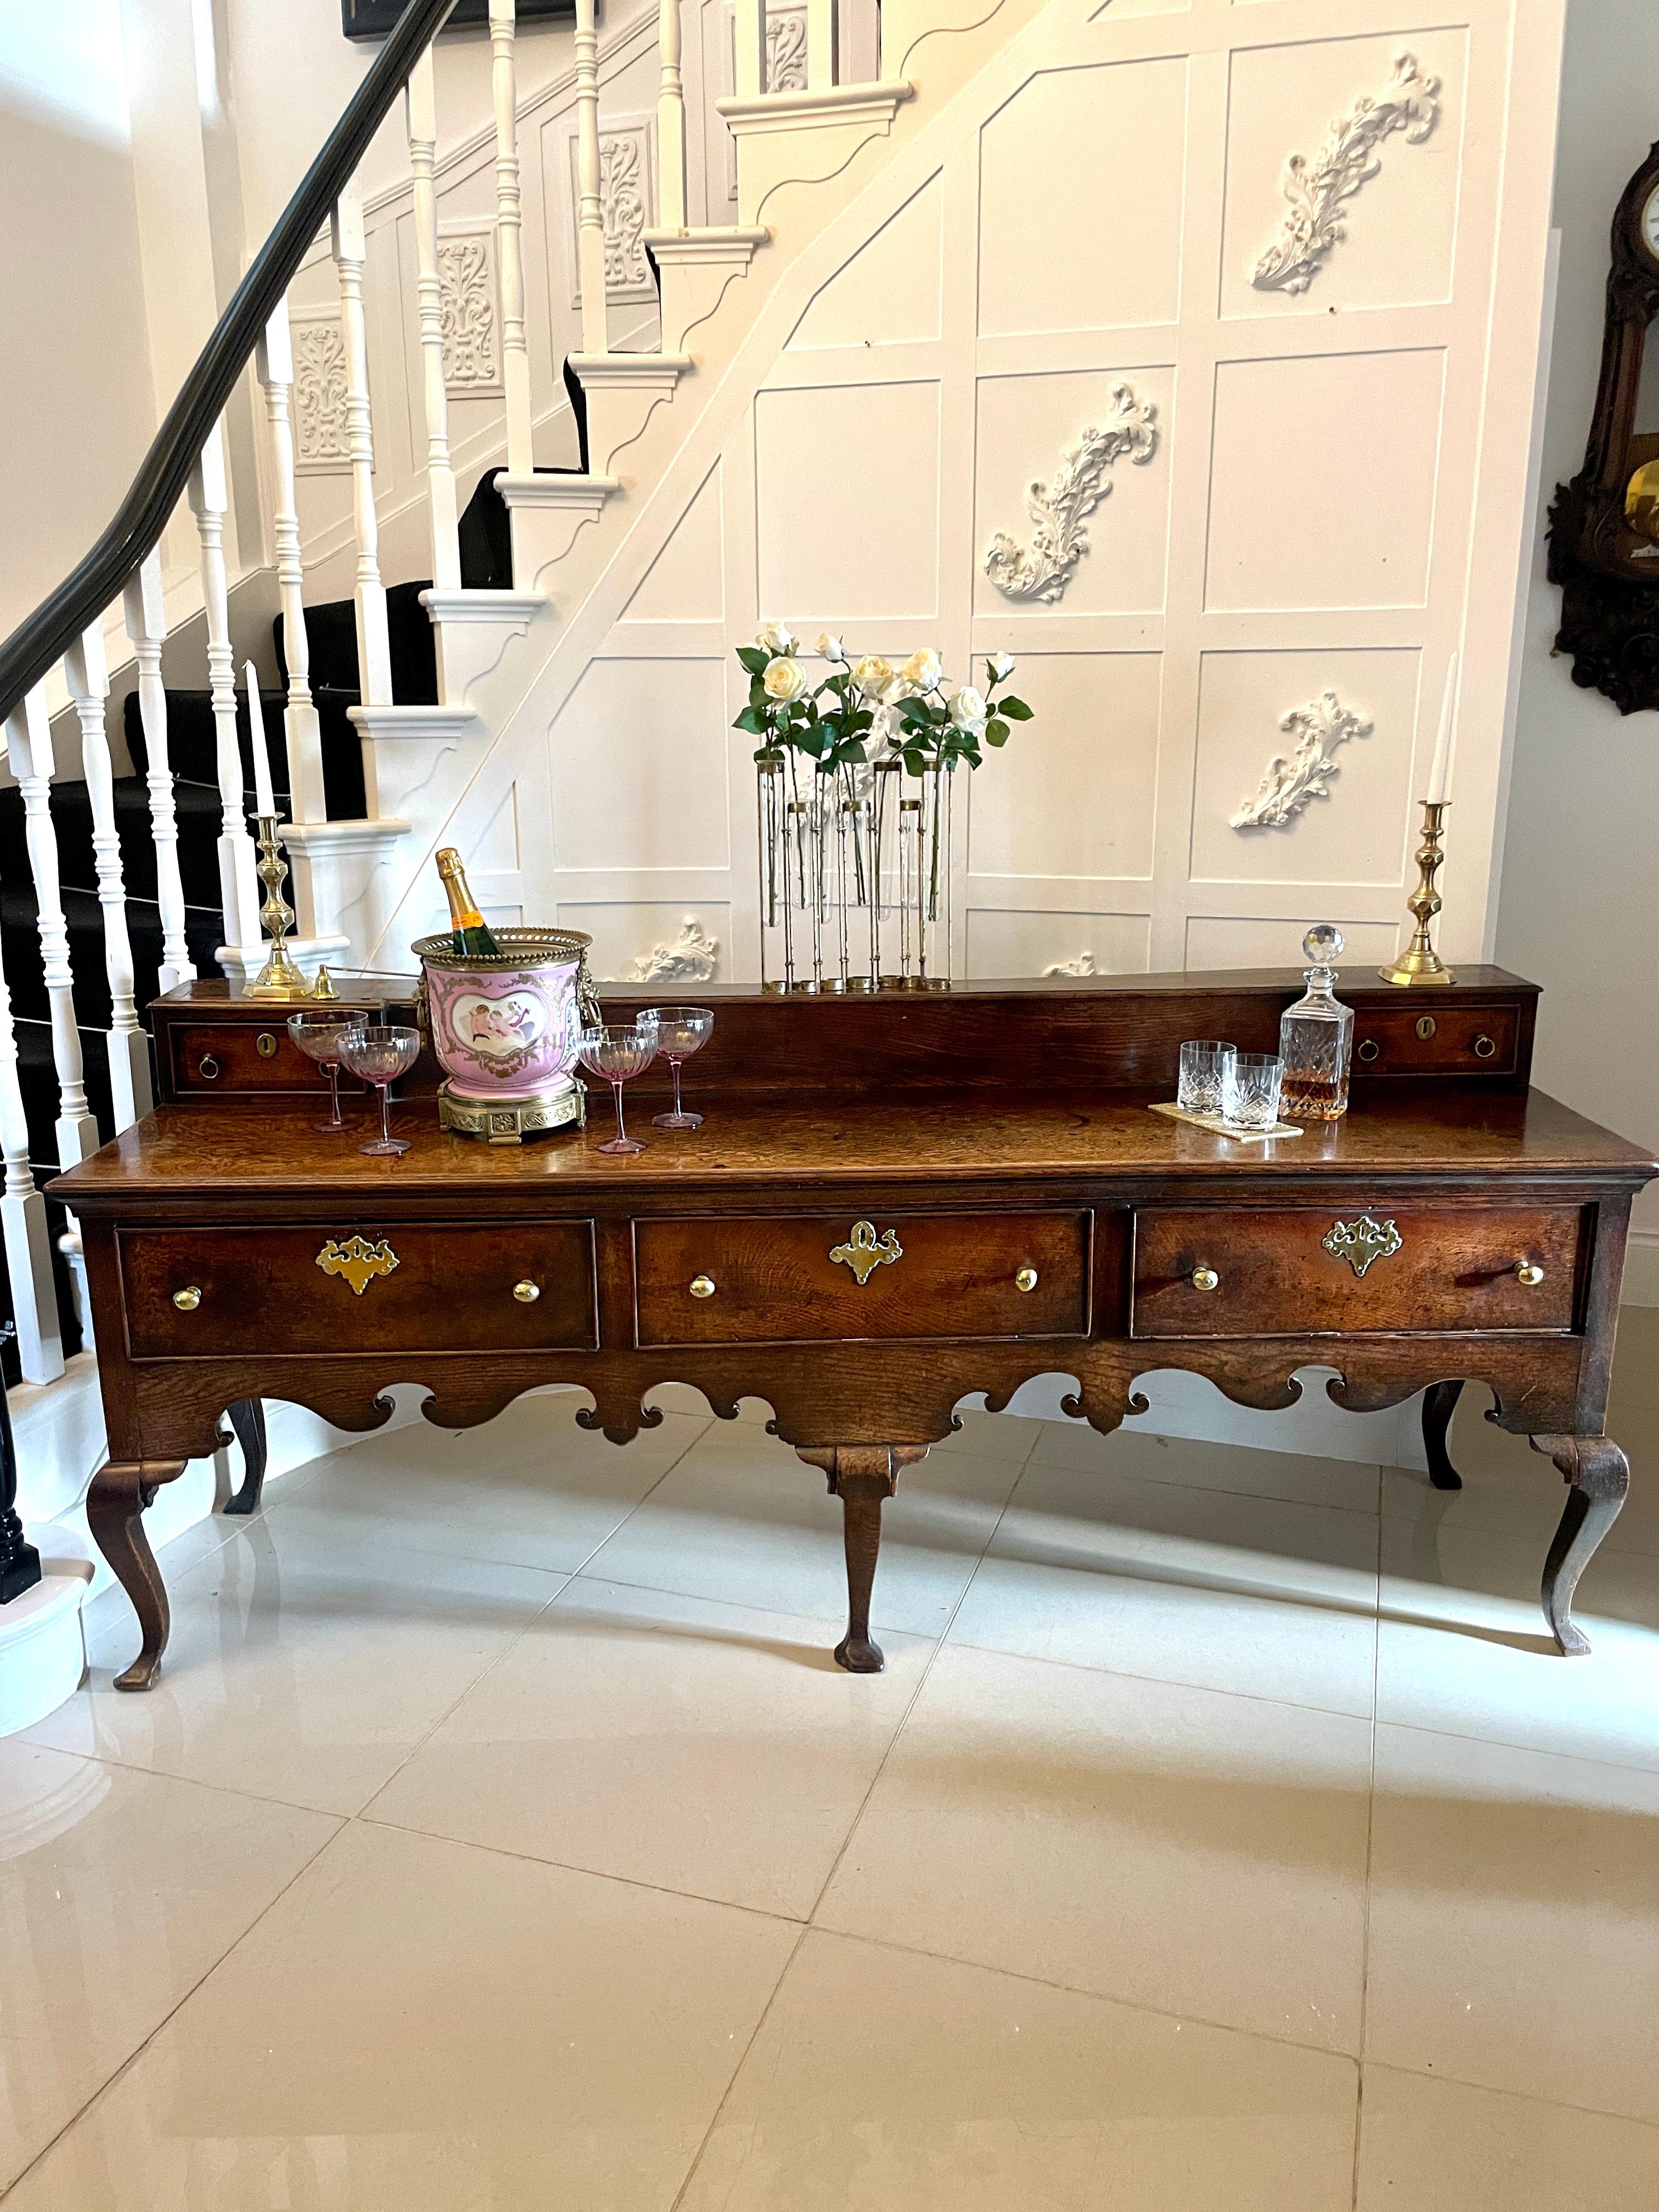 Rare large early 18th century antique quality oak dresser base having a low up stand with two drawers, wonderful quality oak top above three cockbeeded drawers with original brass handles and escutcheons.  It boasts a fabulous shaped frieze with